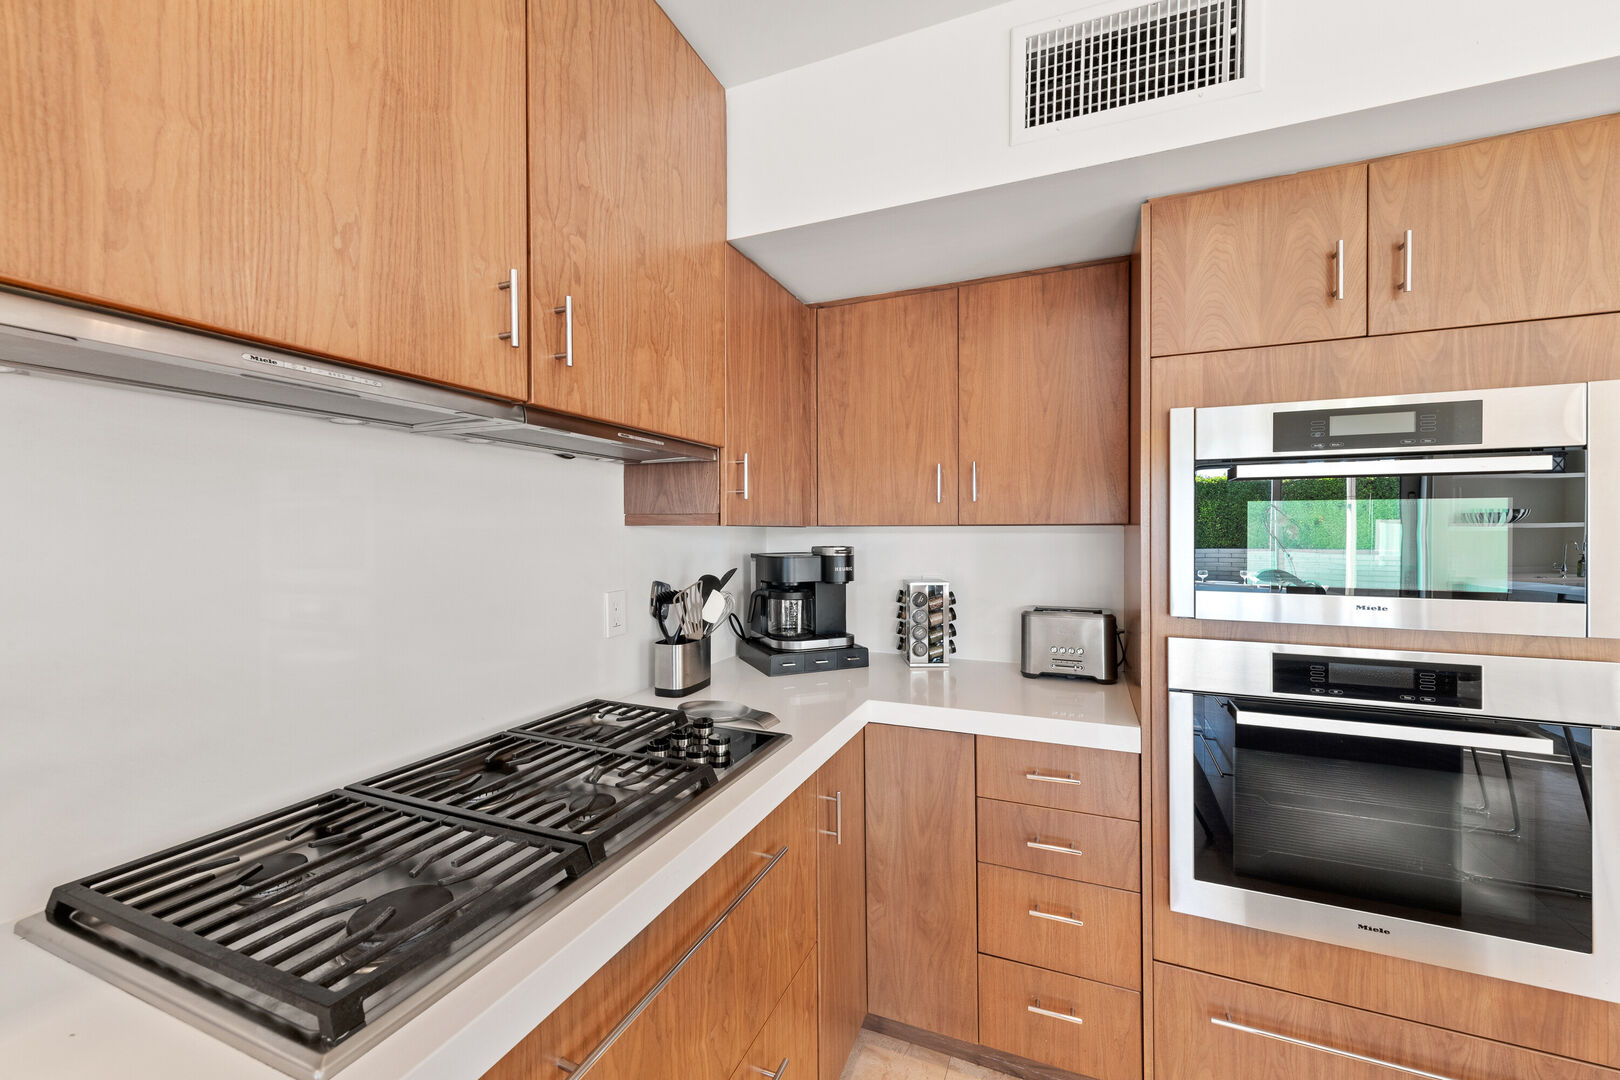 MODERN, UPDATED, LUXURY CHEF'S KITCHEN, FULLY STOCKED AND READY TO GO!